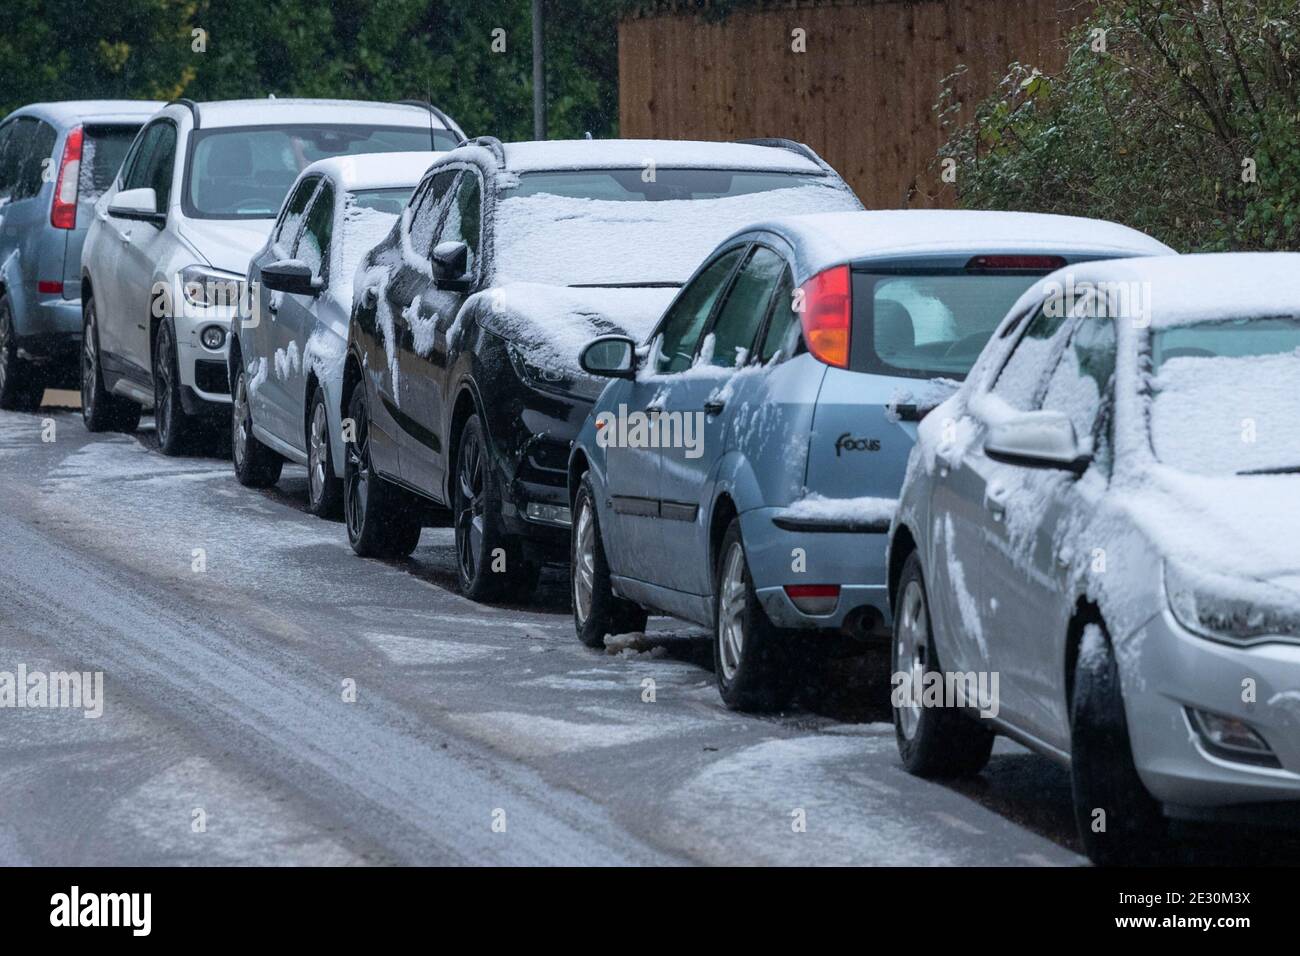 Brentwood Essex 16th January 2021 WEATHER Light snow in Brentwood Essex UK parked cars on urban street in snow, Credit: Ian Davidson/Alamy Live News Stock Photo